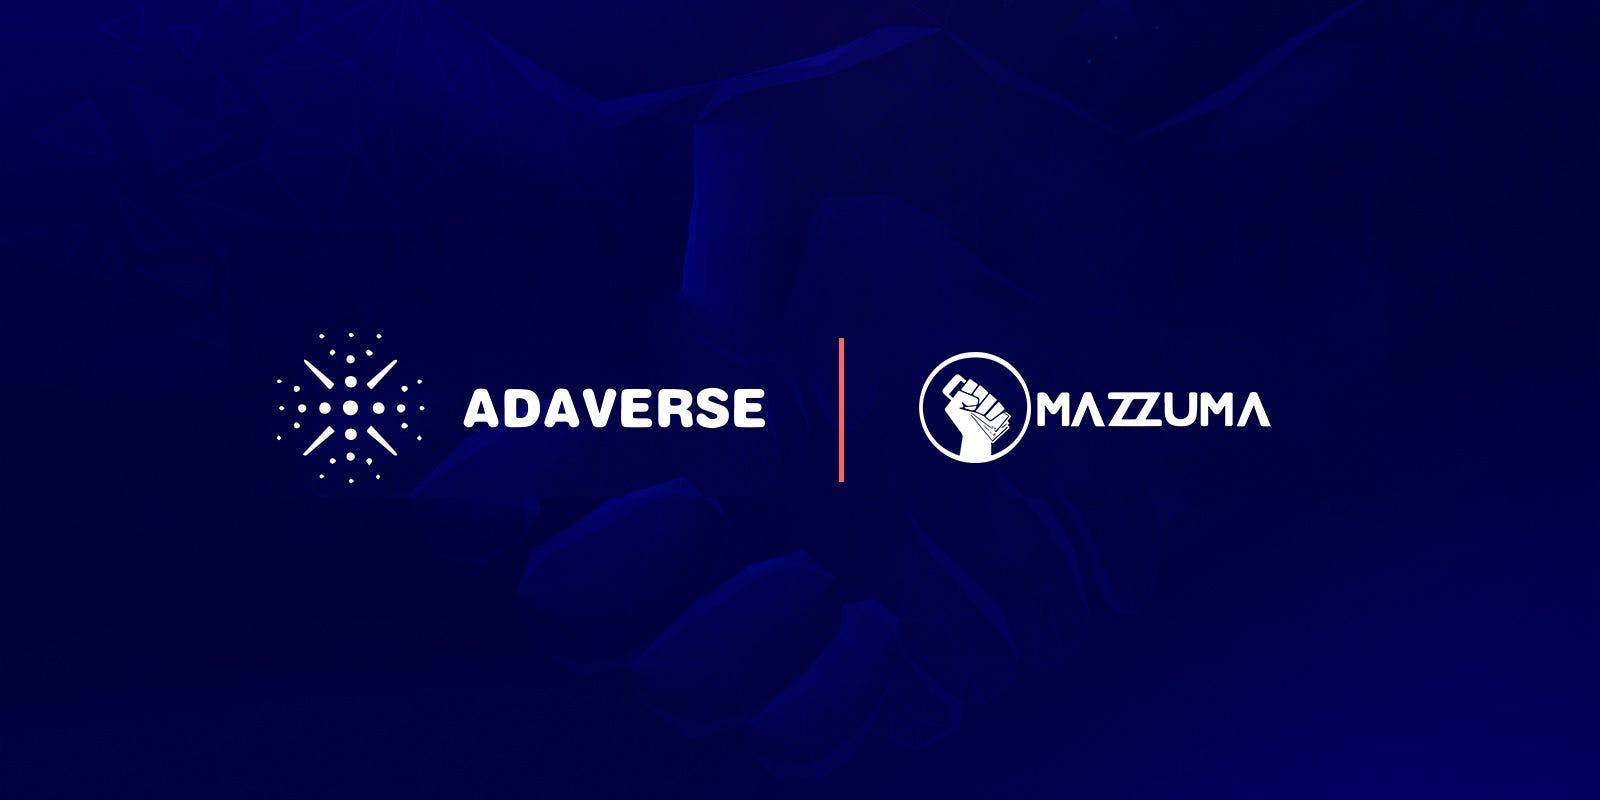 Mazzuma Gets Funding From Cardano Accelerator Adaverse, To Launch its AI-Powered Smart Contract Generator MazzumaGPT